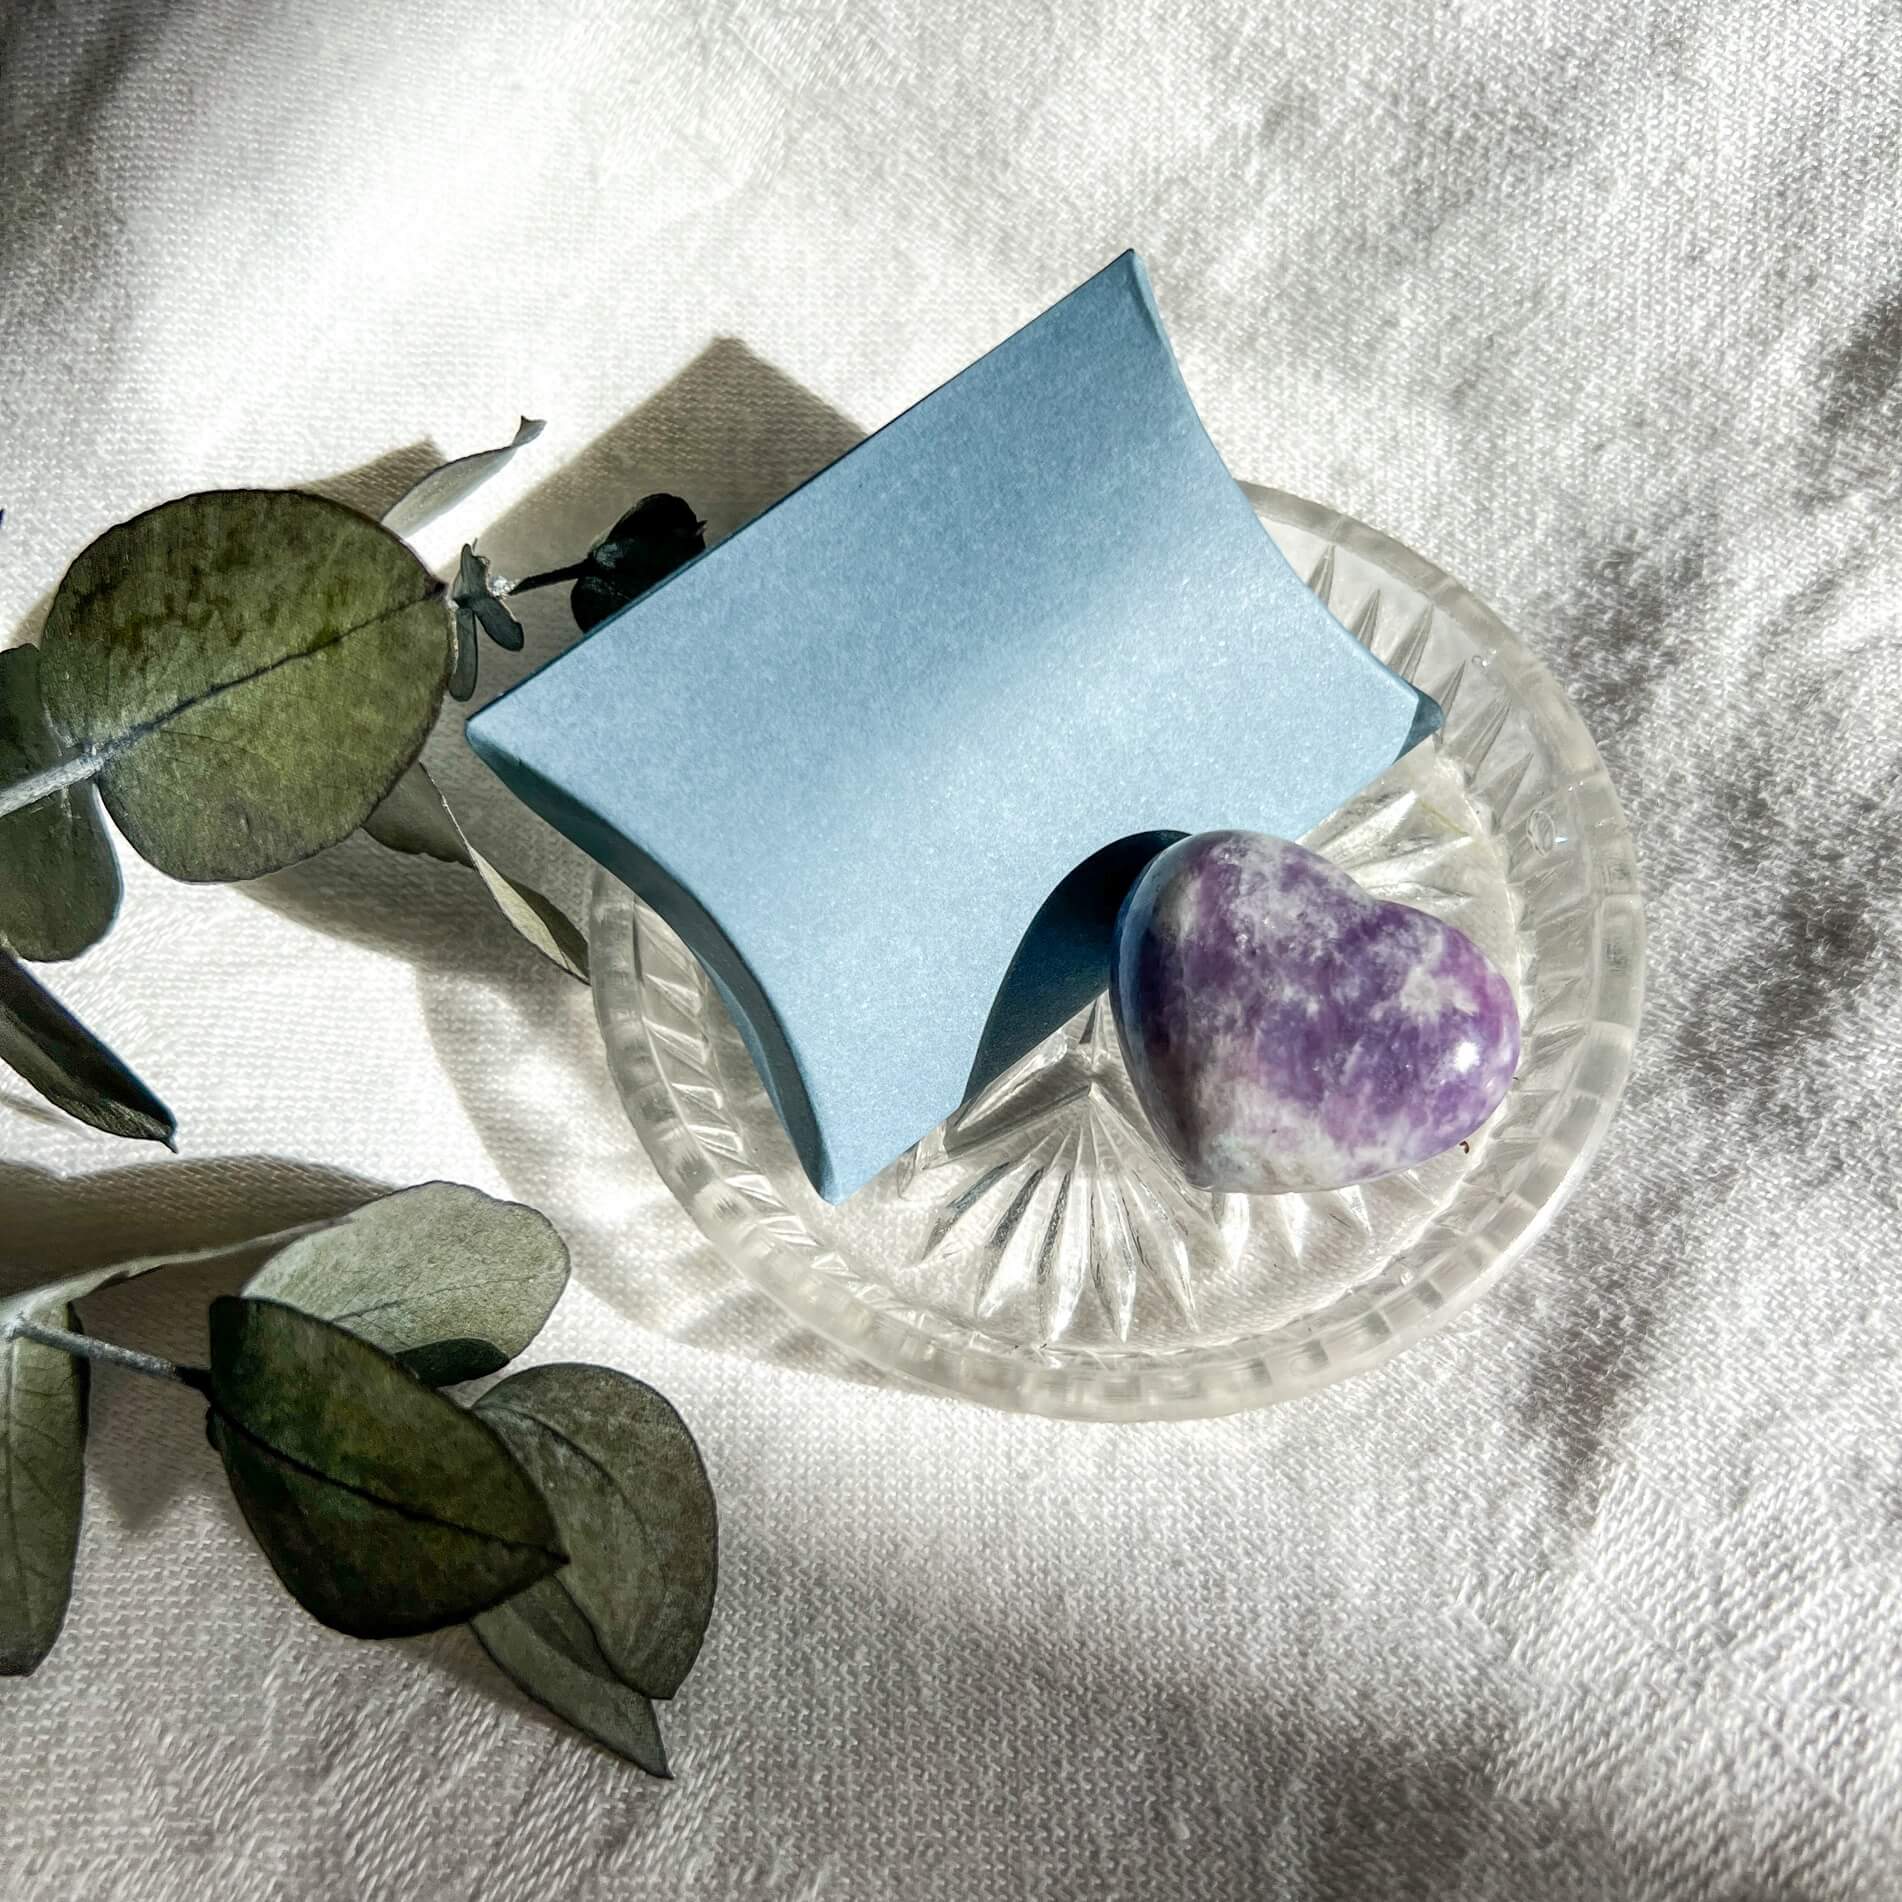 A Purple and lilac coloured lepidolite crystal mini heart displayed in a small glass dish with a pale blue pillow box and eucalyptus leaves in the background